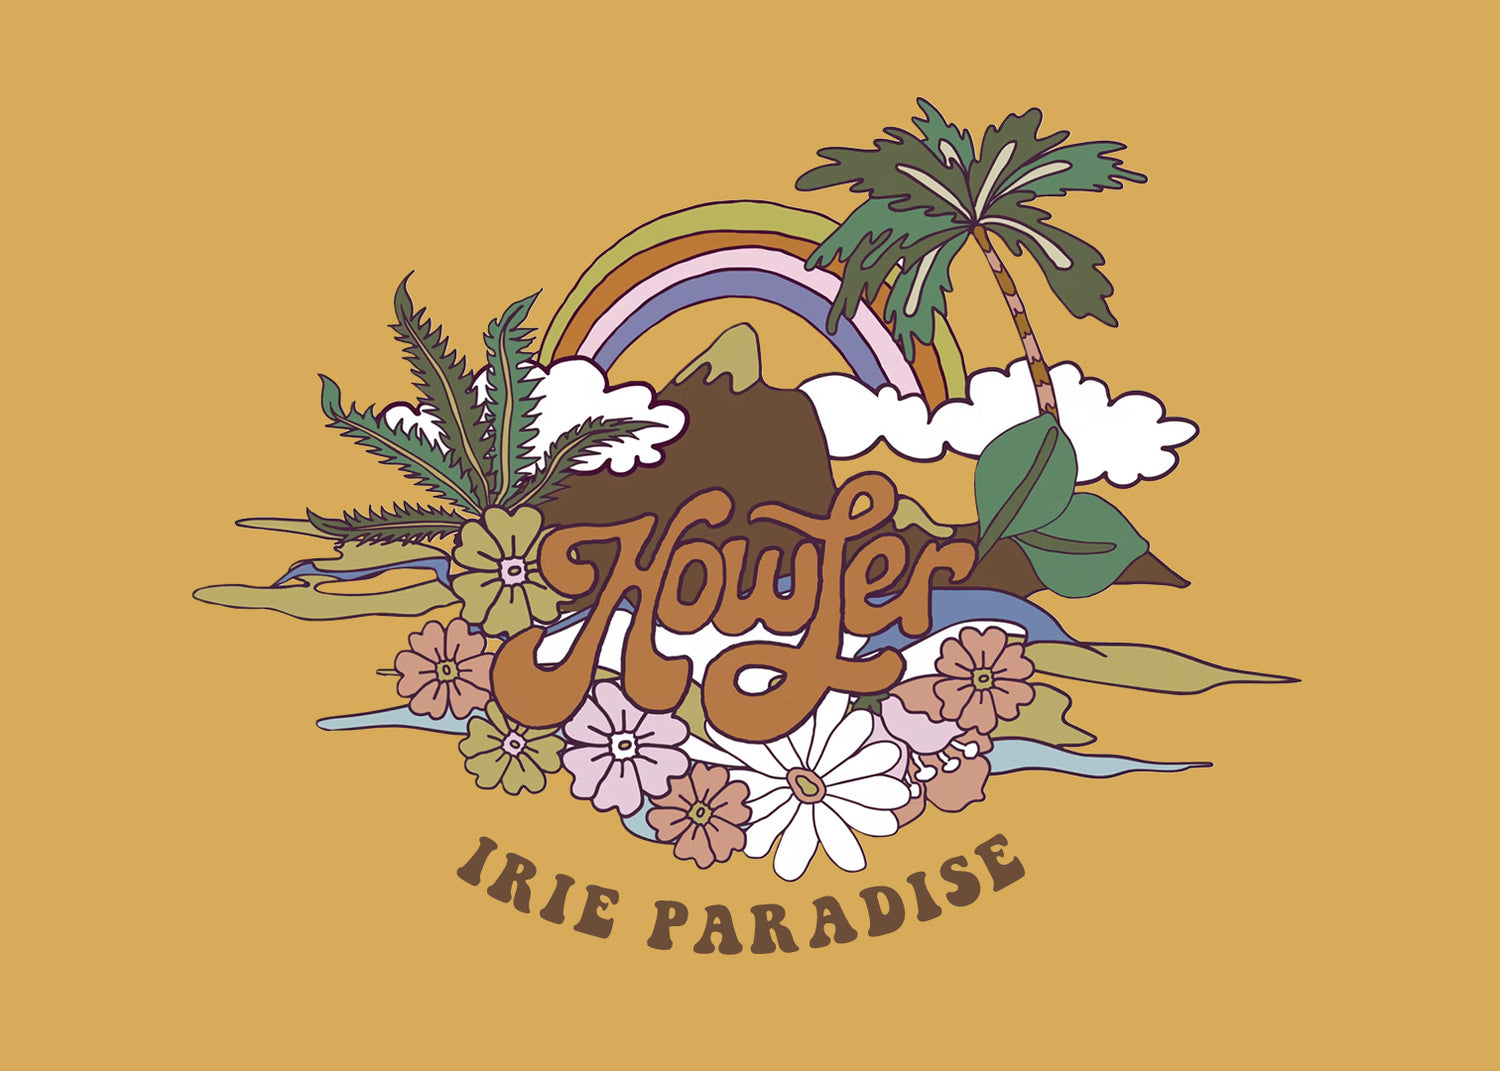 Irie Paradise by Howler Brothers